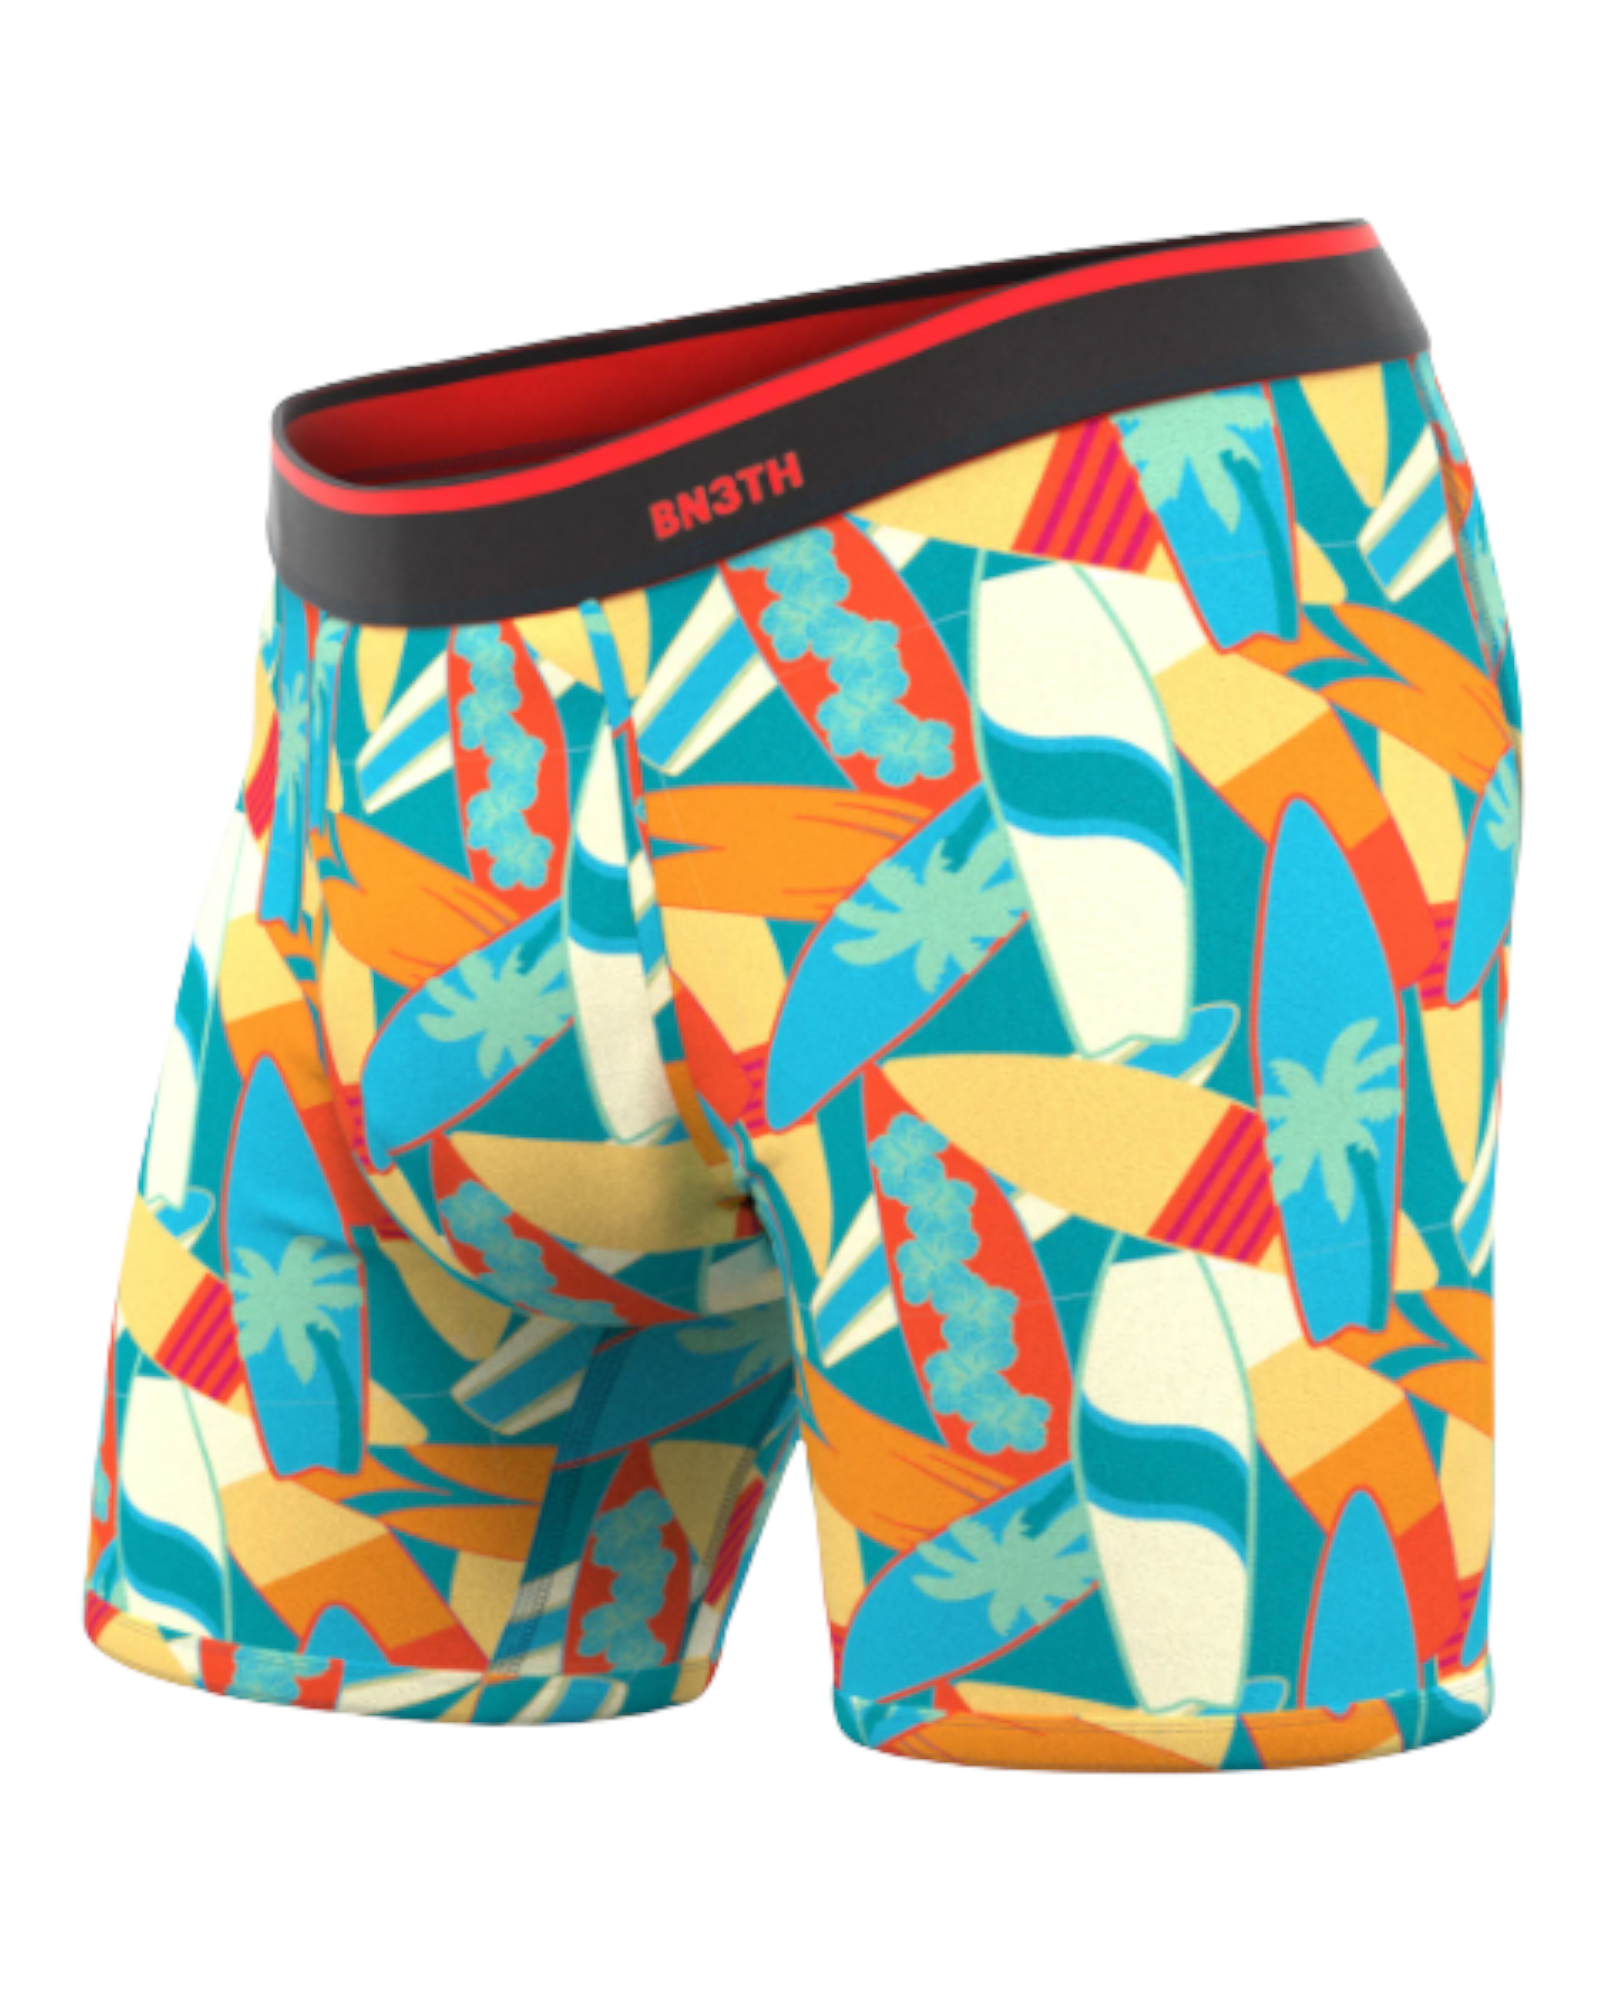 BN3TH Classic Boxer Brief (SurfShop).